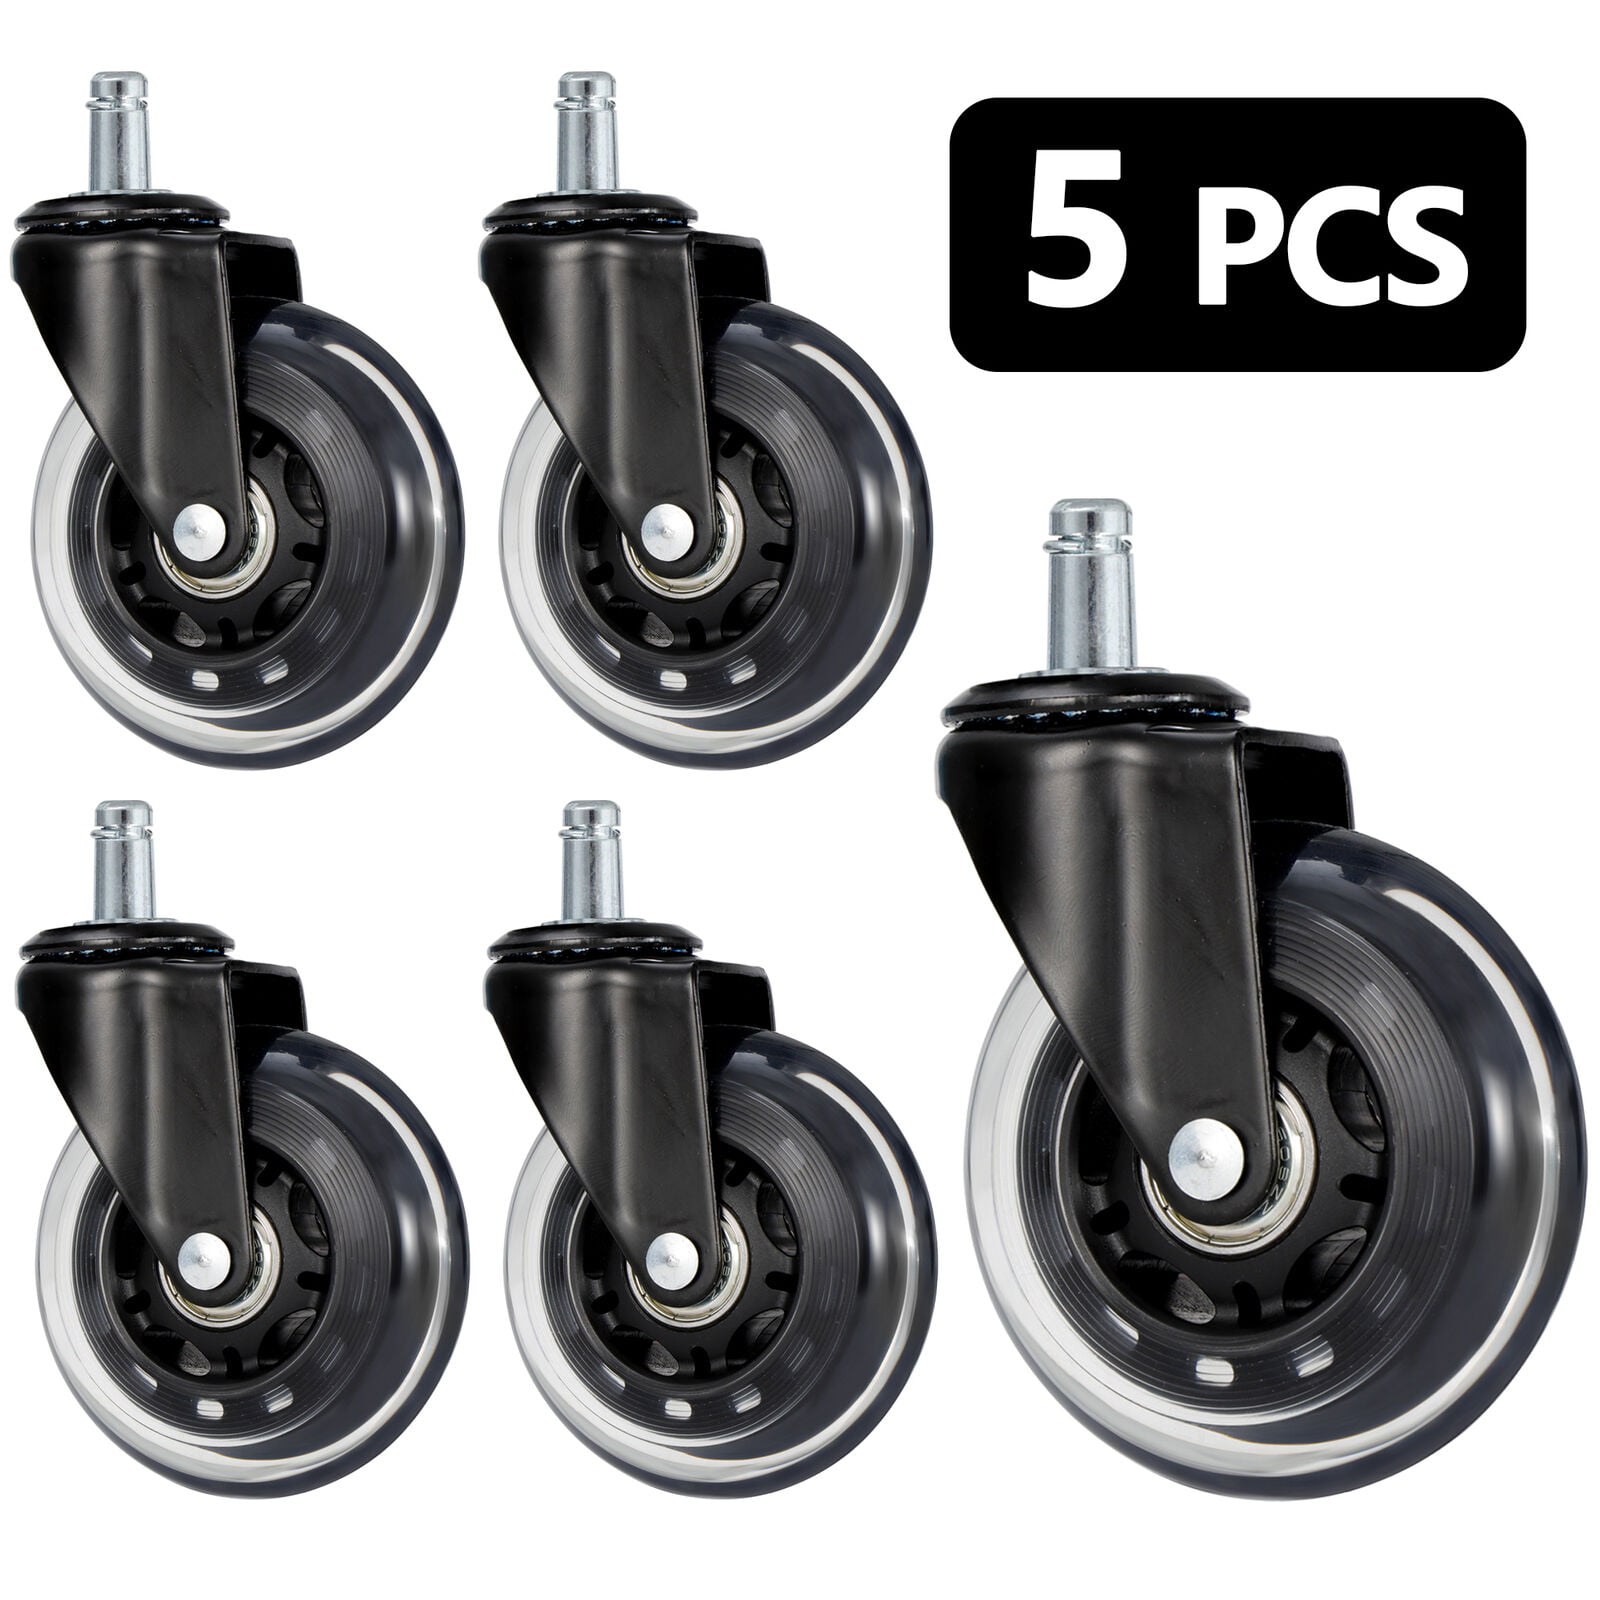 5pcs 3" Office Chair Casters Heavy Duty Wheels 360° Rotation Wheel Replacement 